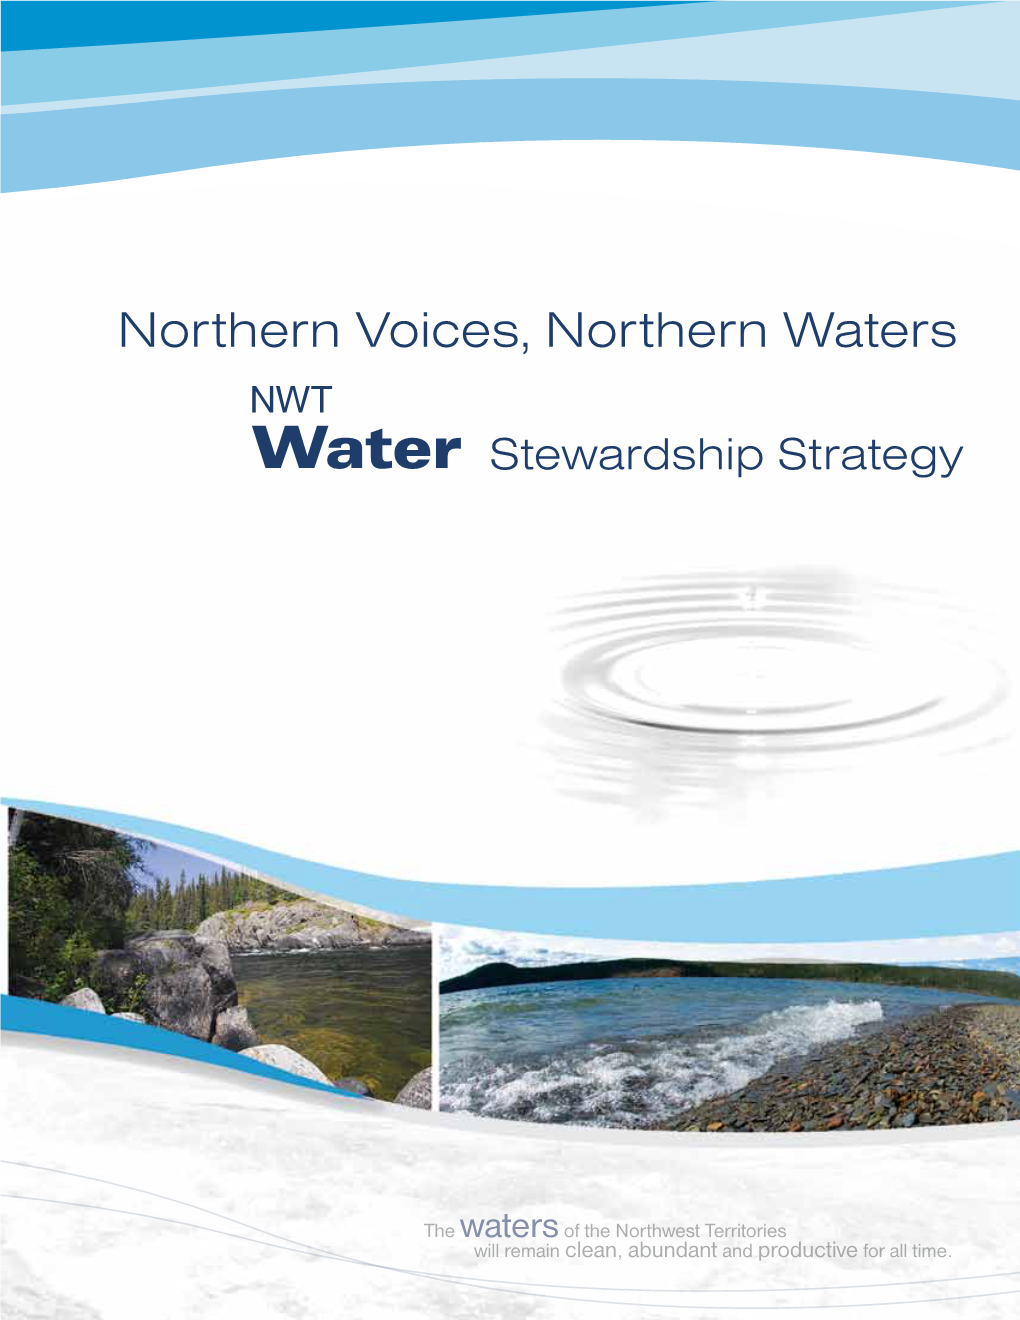 Northern Voices, Northern Waters: NWT Water Stewardship Strategy